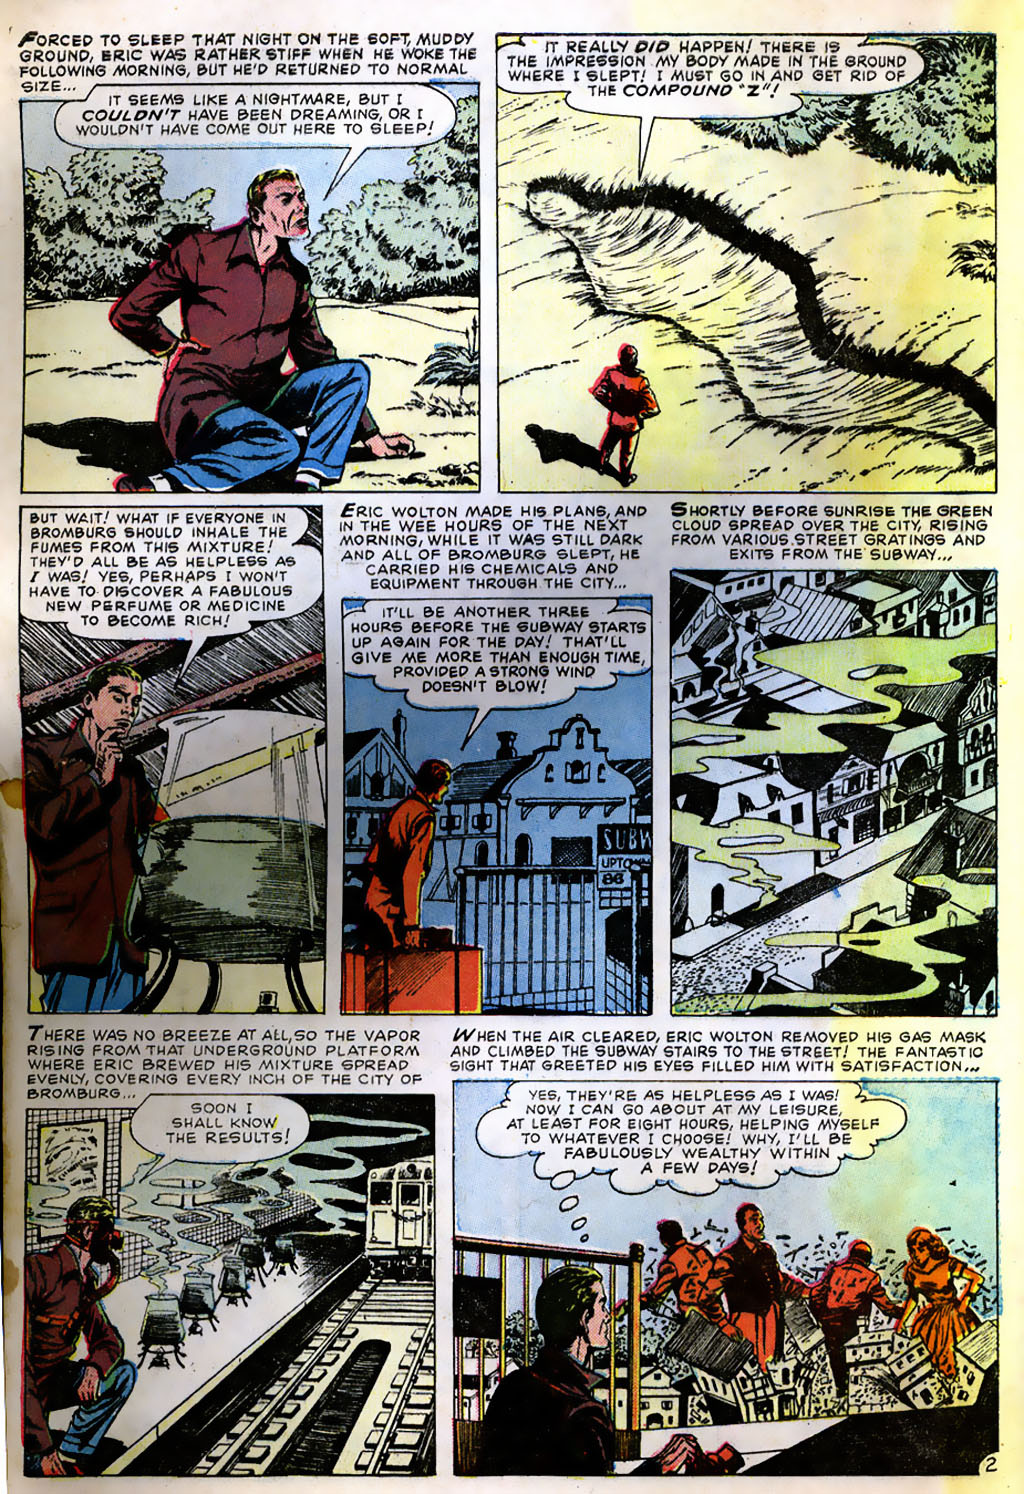 Journey Into Mystery (1952) 49 Page 4